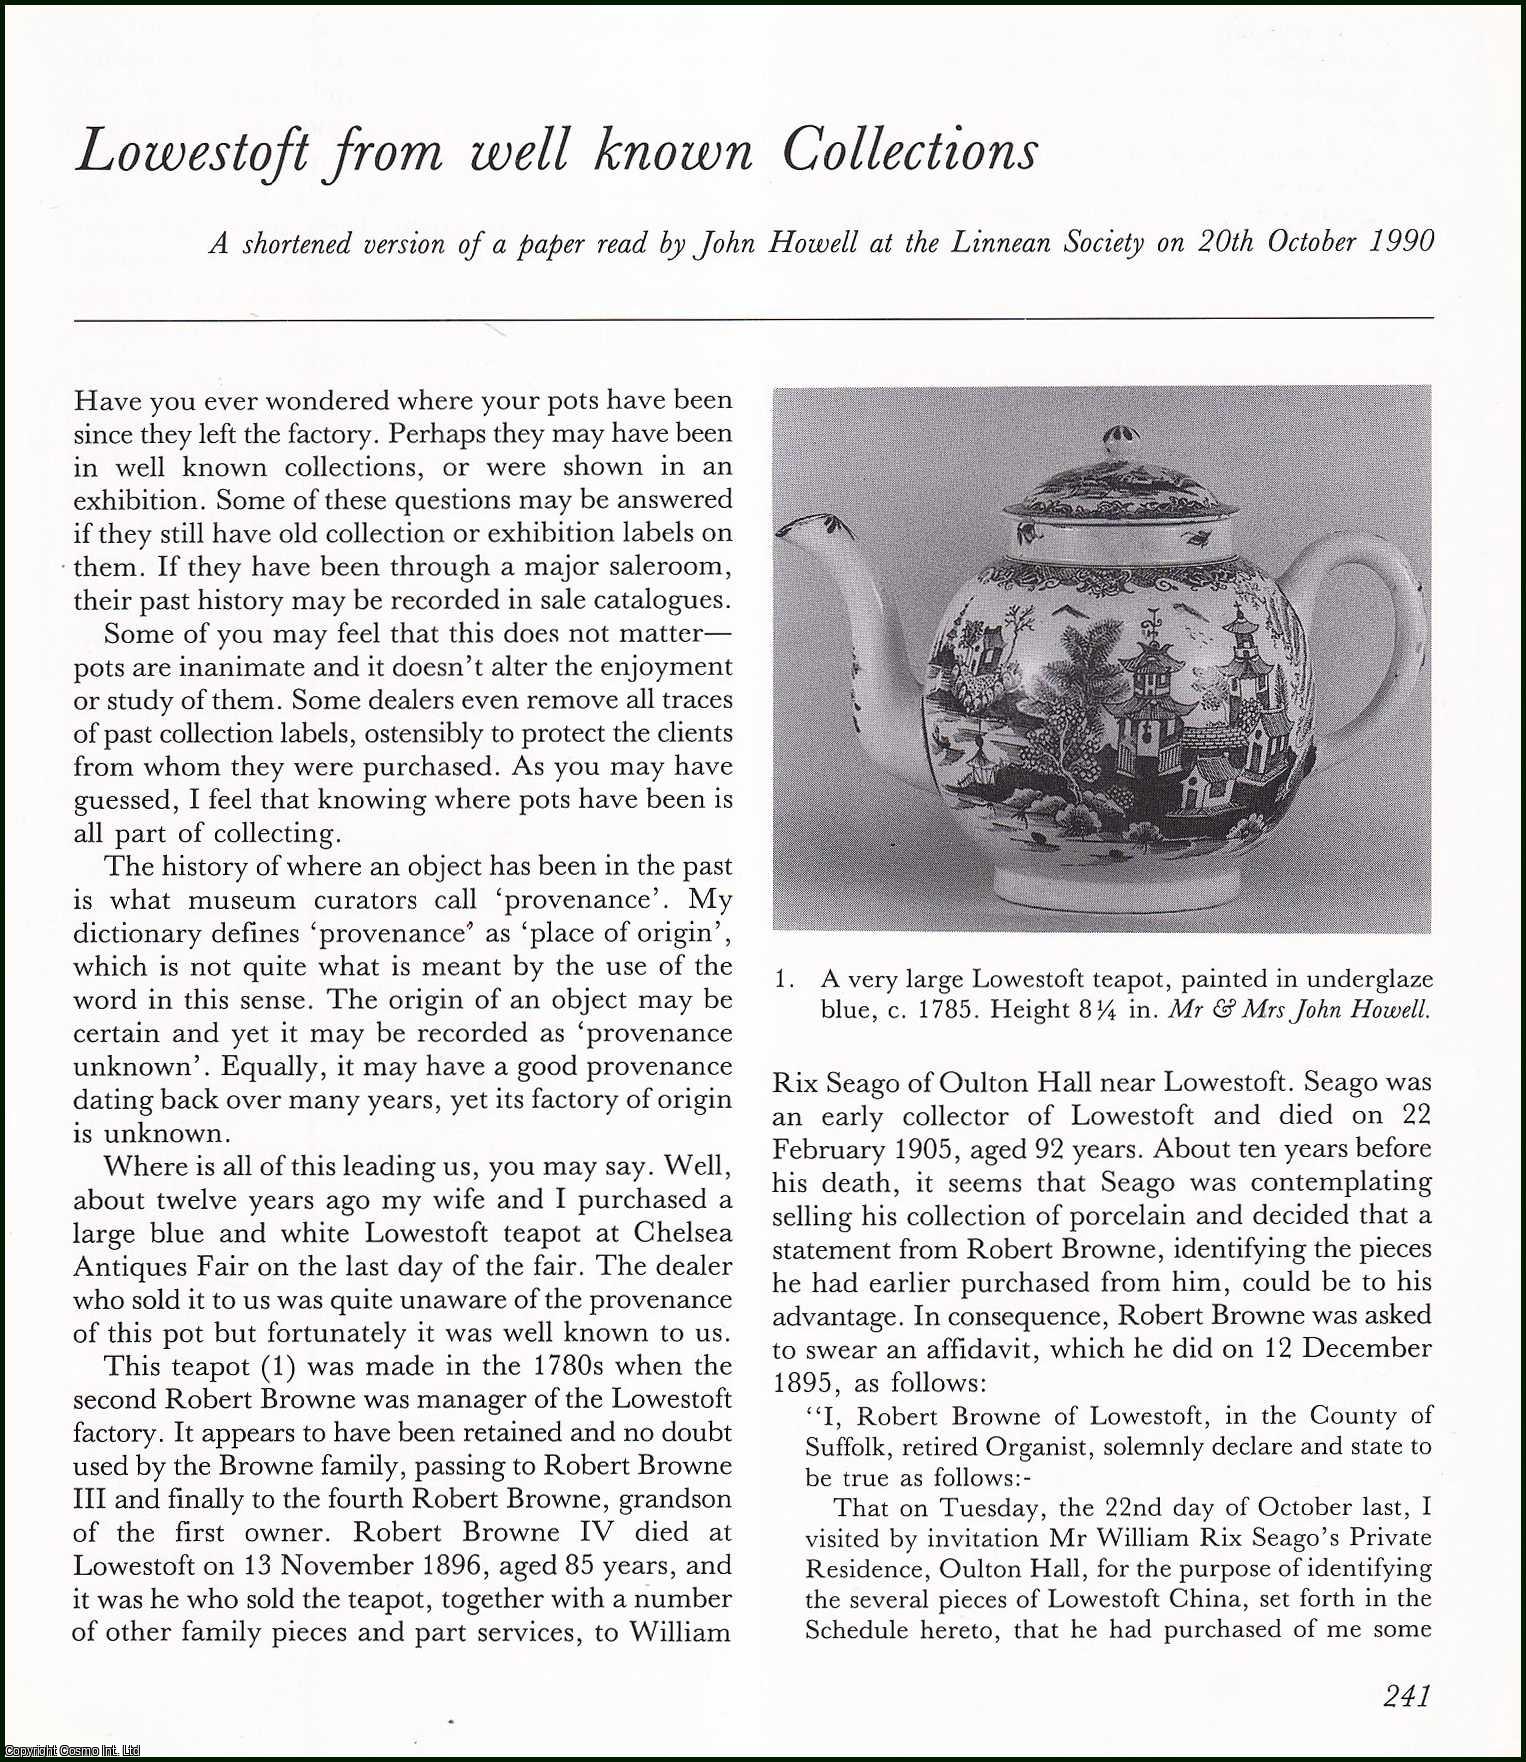 John Howell - Lowestoft Porcelain from well known Collections. An original article from the English Ceramic Circle, 1992.